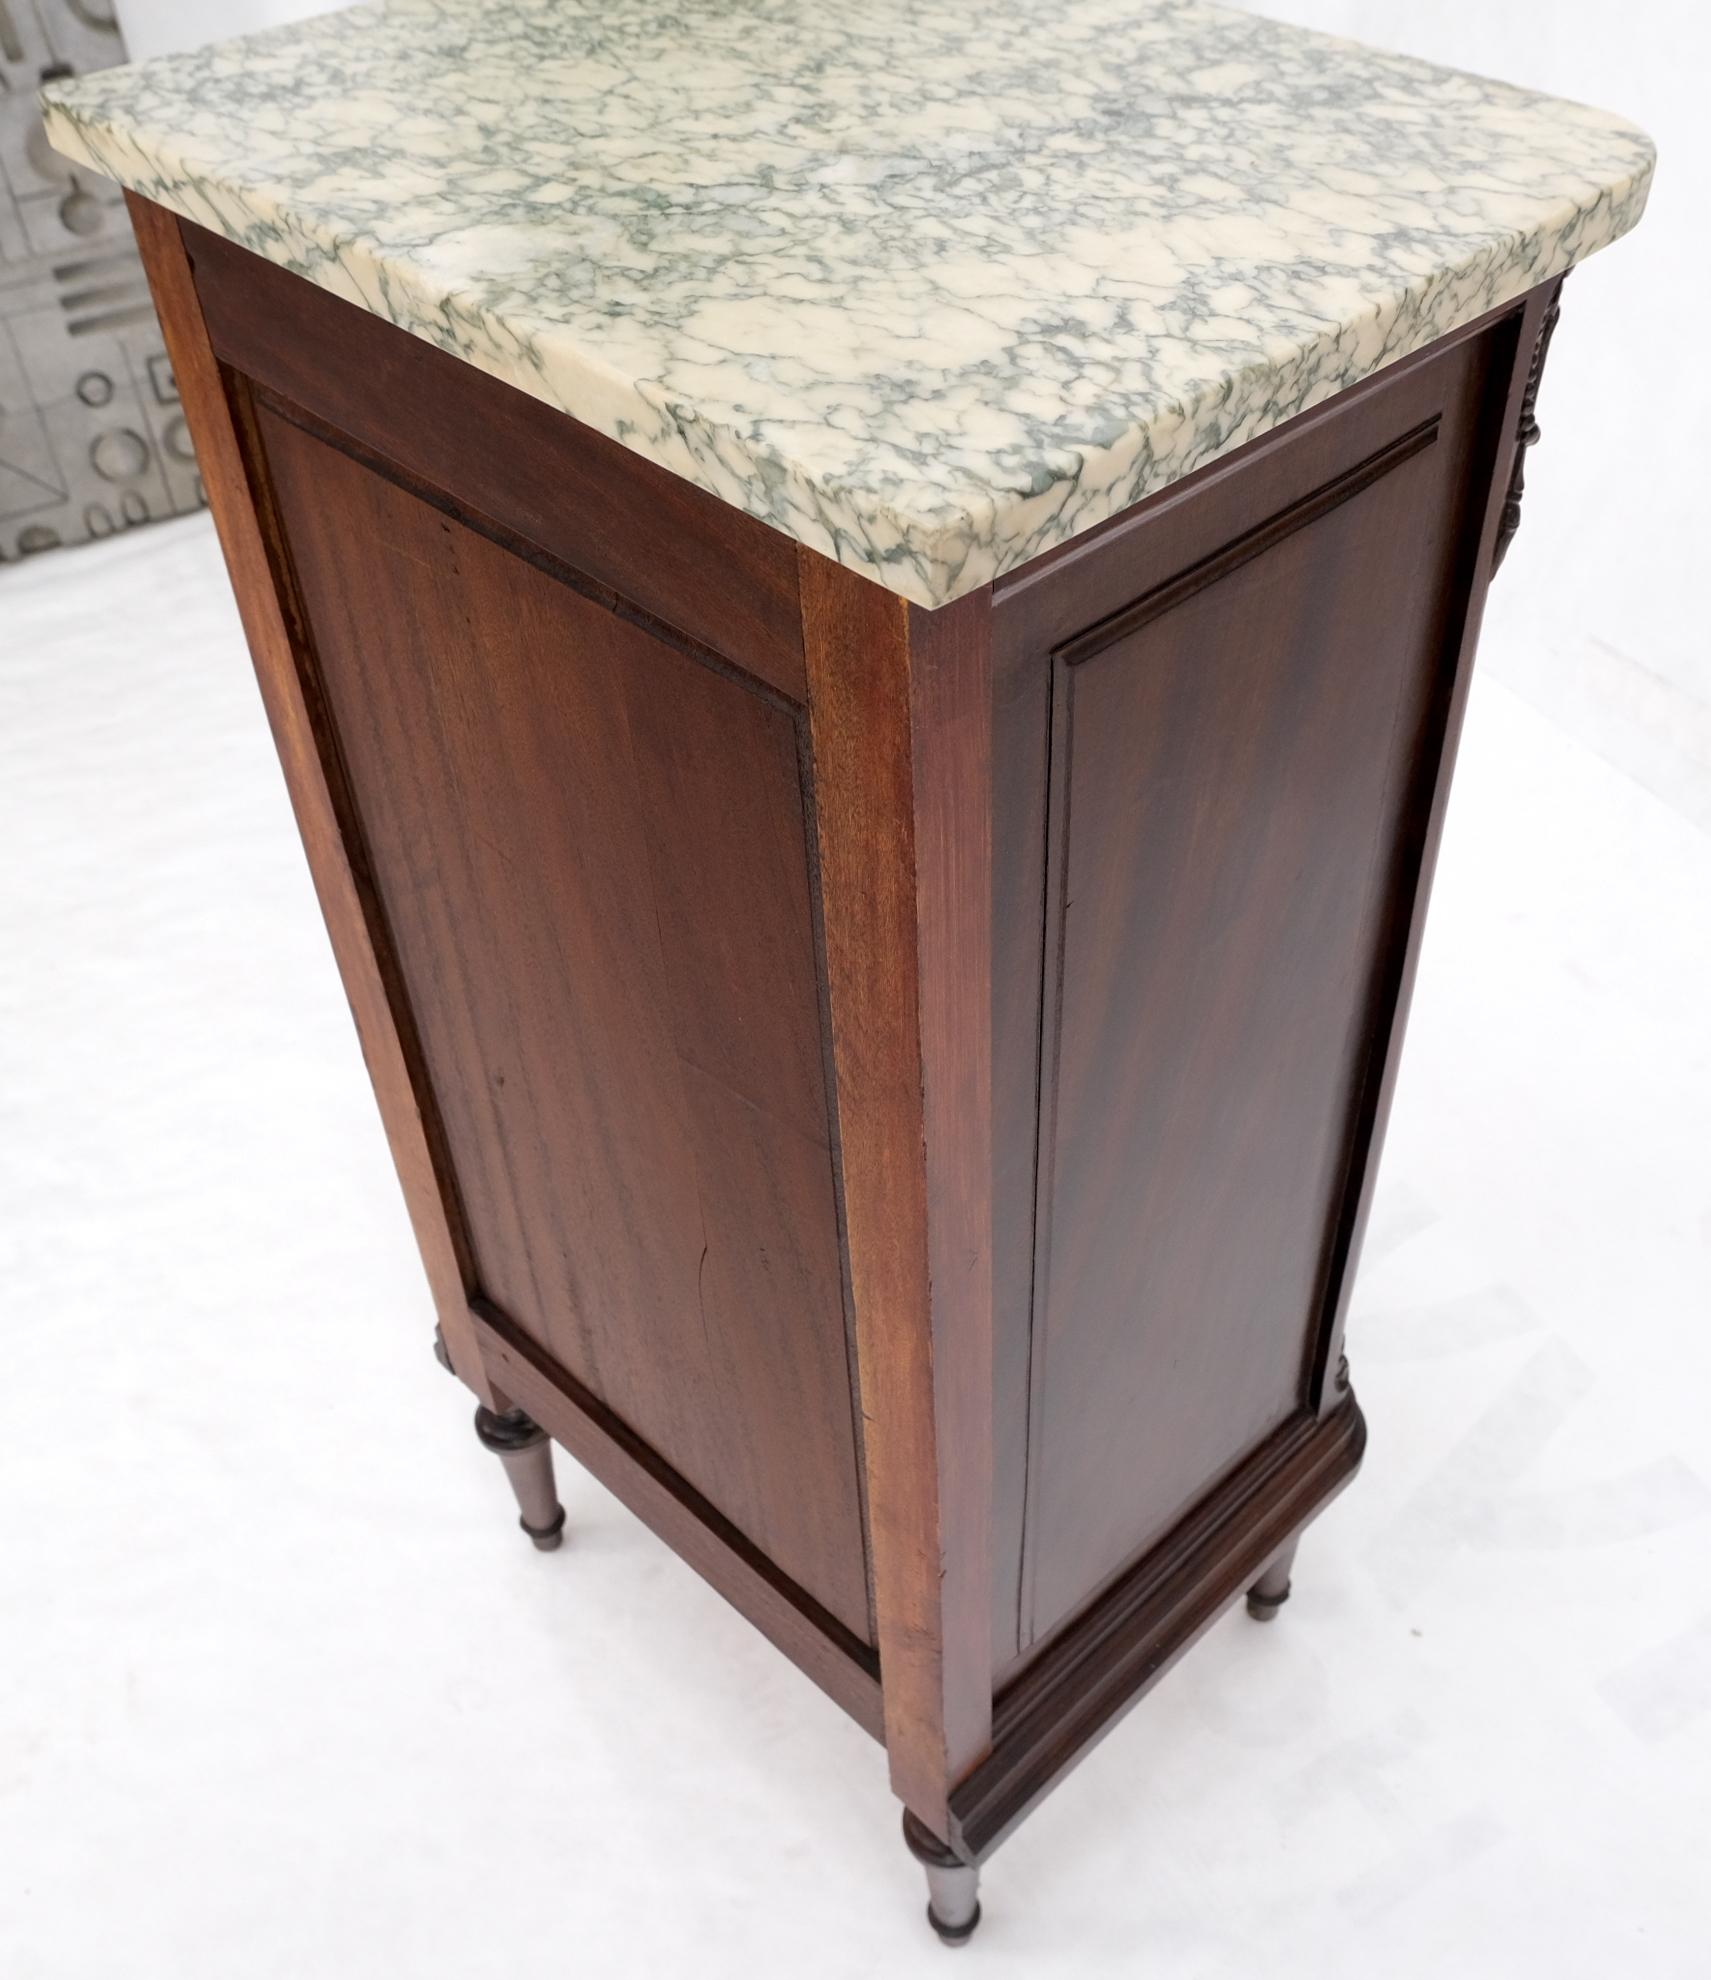 Tall Narrow Walnut Marble Top Night Stands End Table Cabinet Porcelain Insert For Sale 8